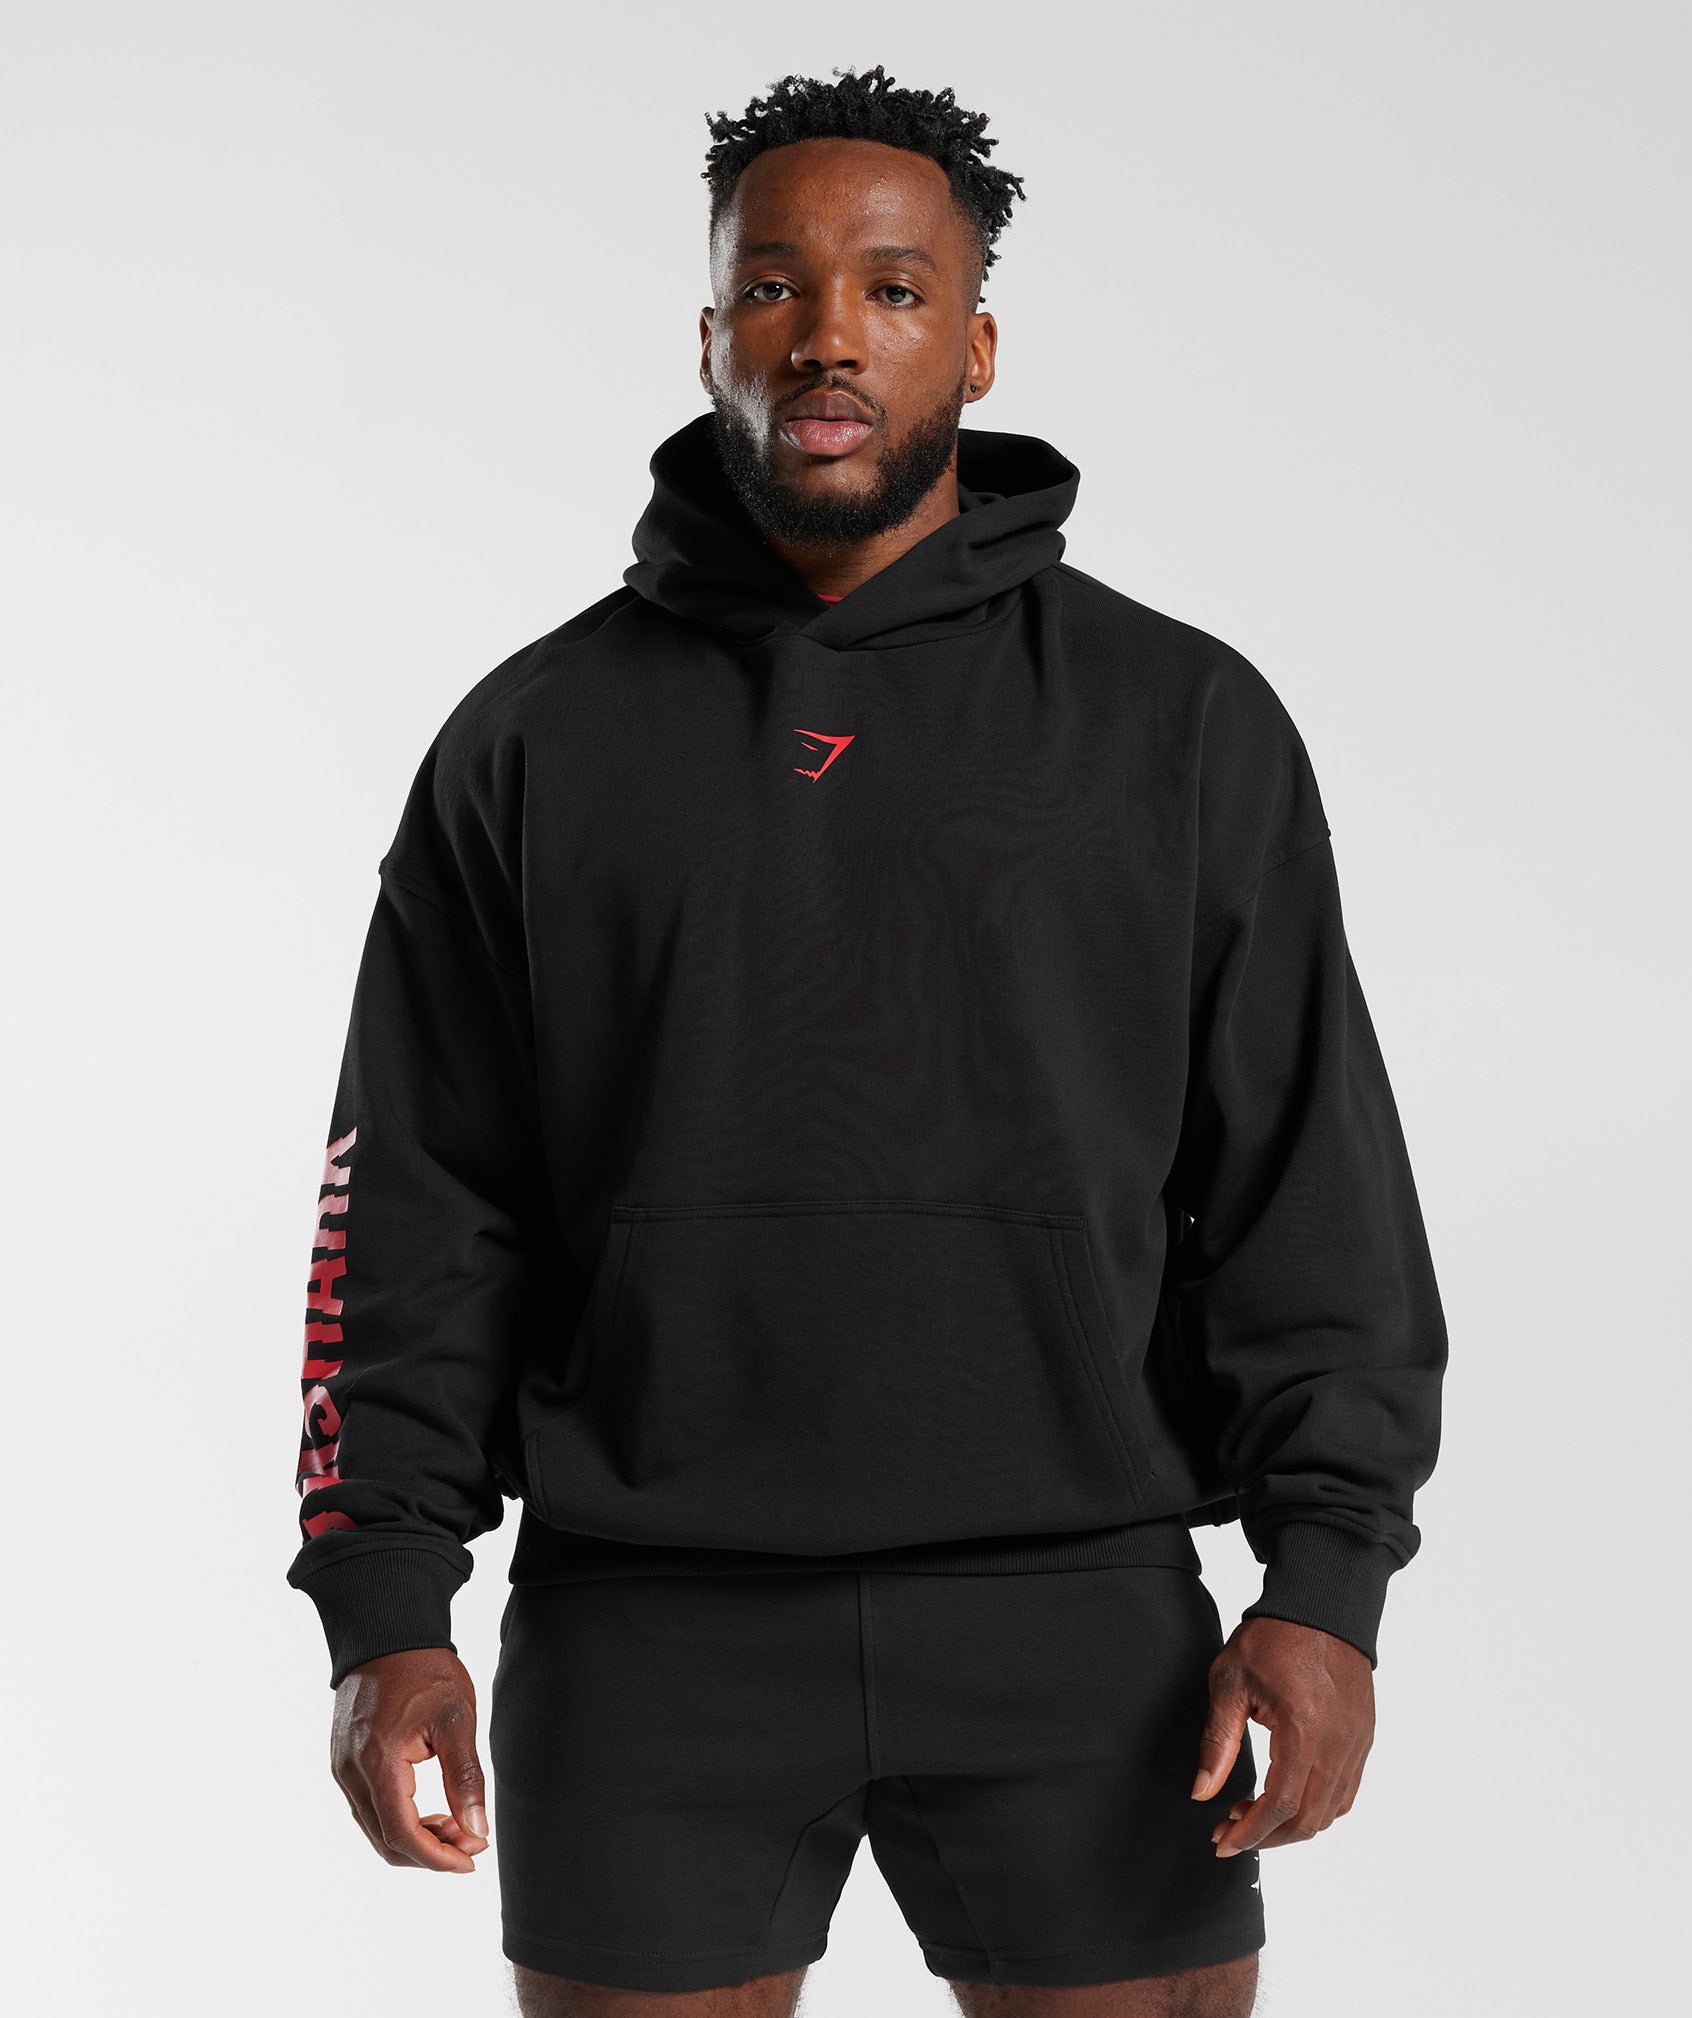 Gymshark Recess Hoodie Pink - $35 (30% Off Retail) New With Tags - From  Courtney